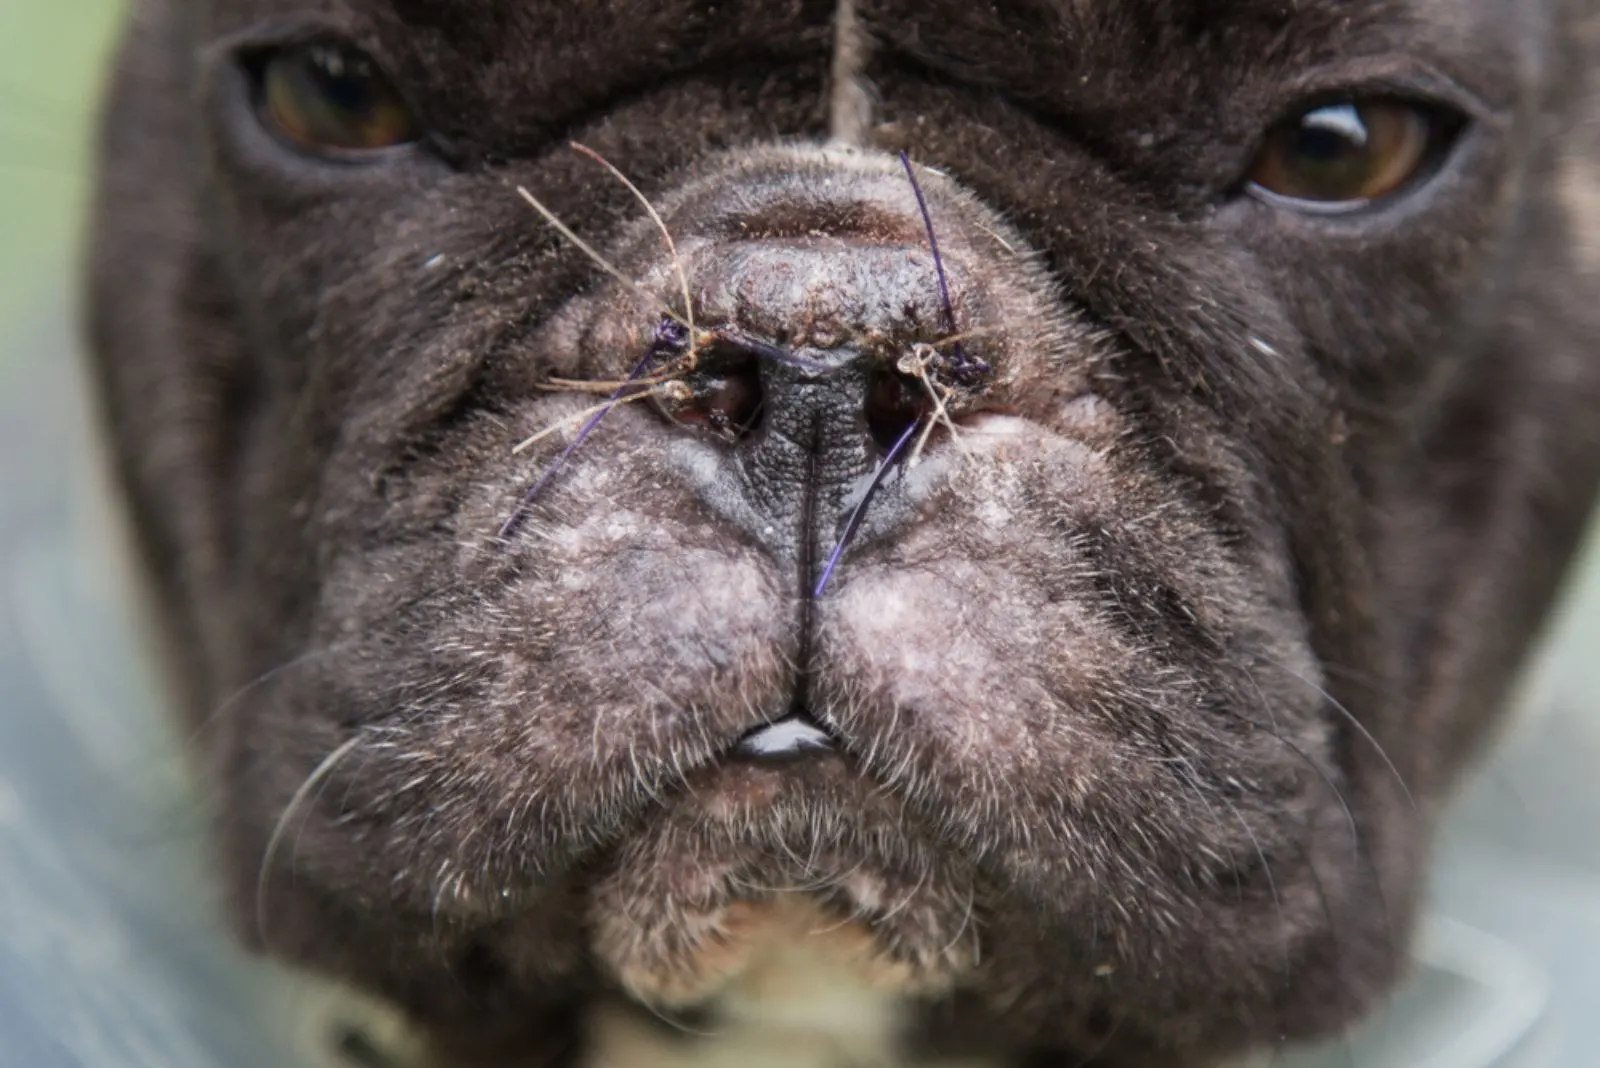 French bulldog after nose surgery.